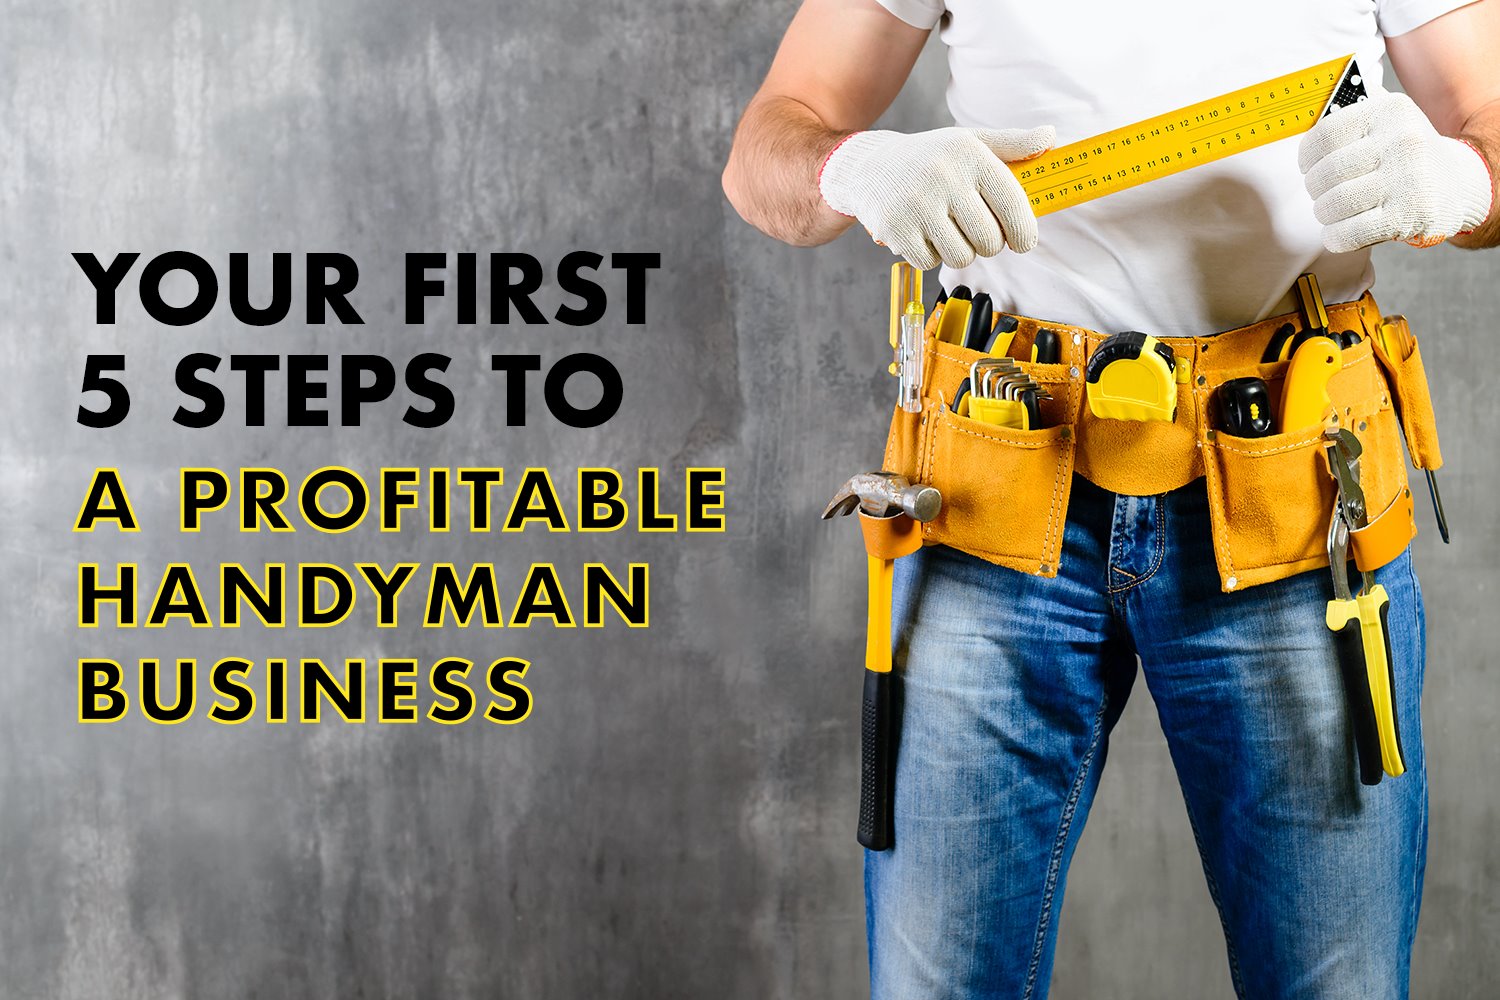 First 5 Steps to Starting a Profitable Handyman Business